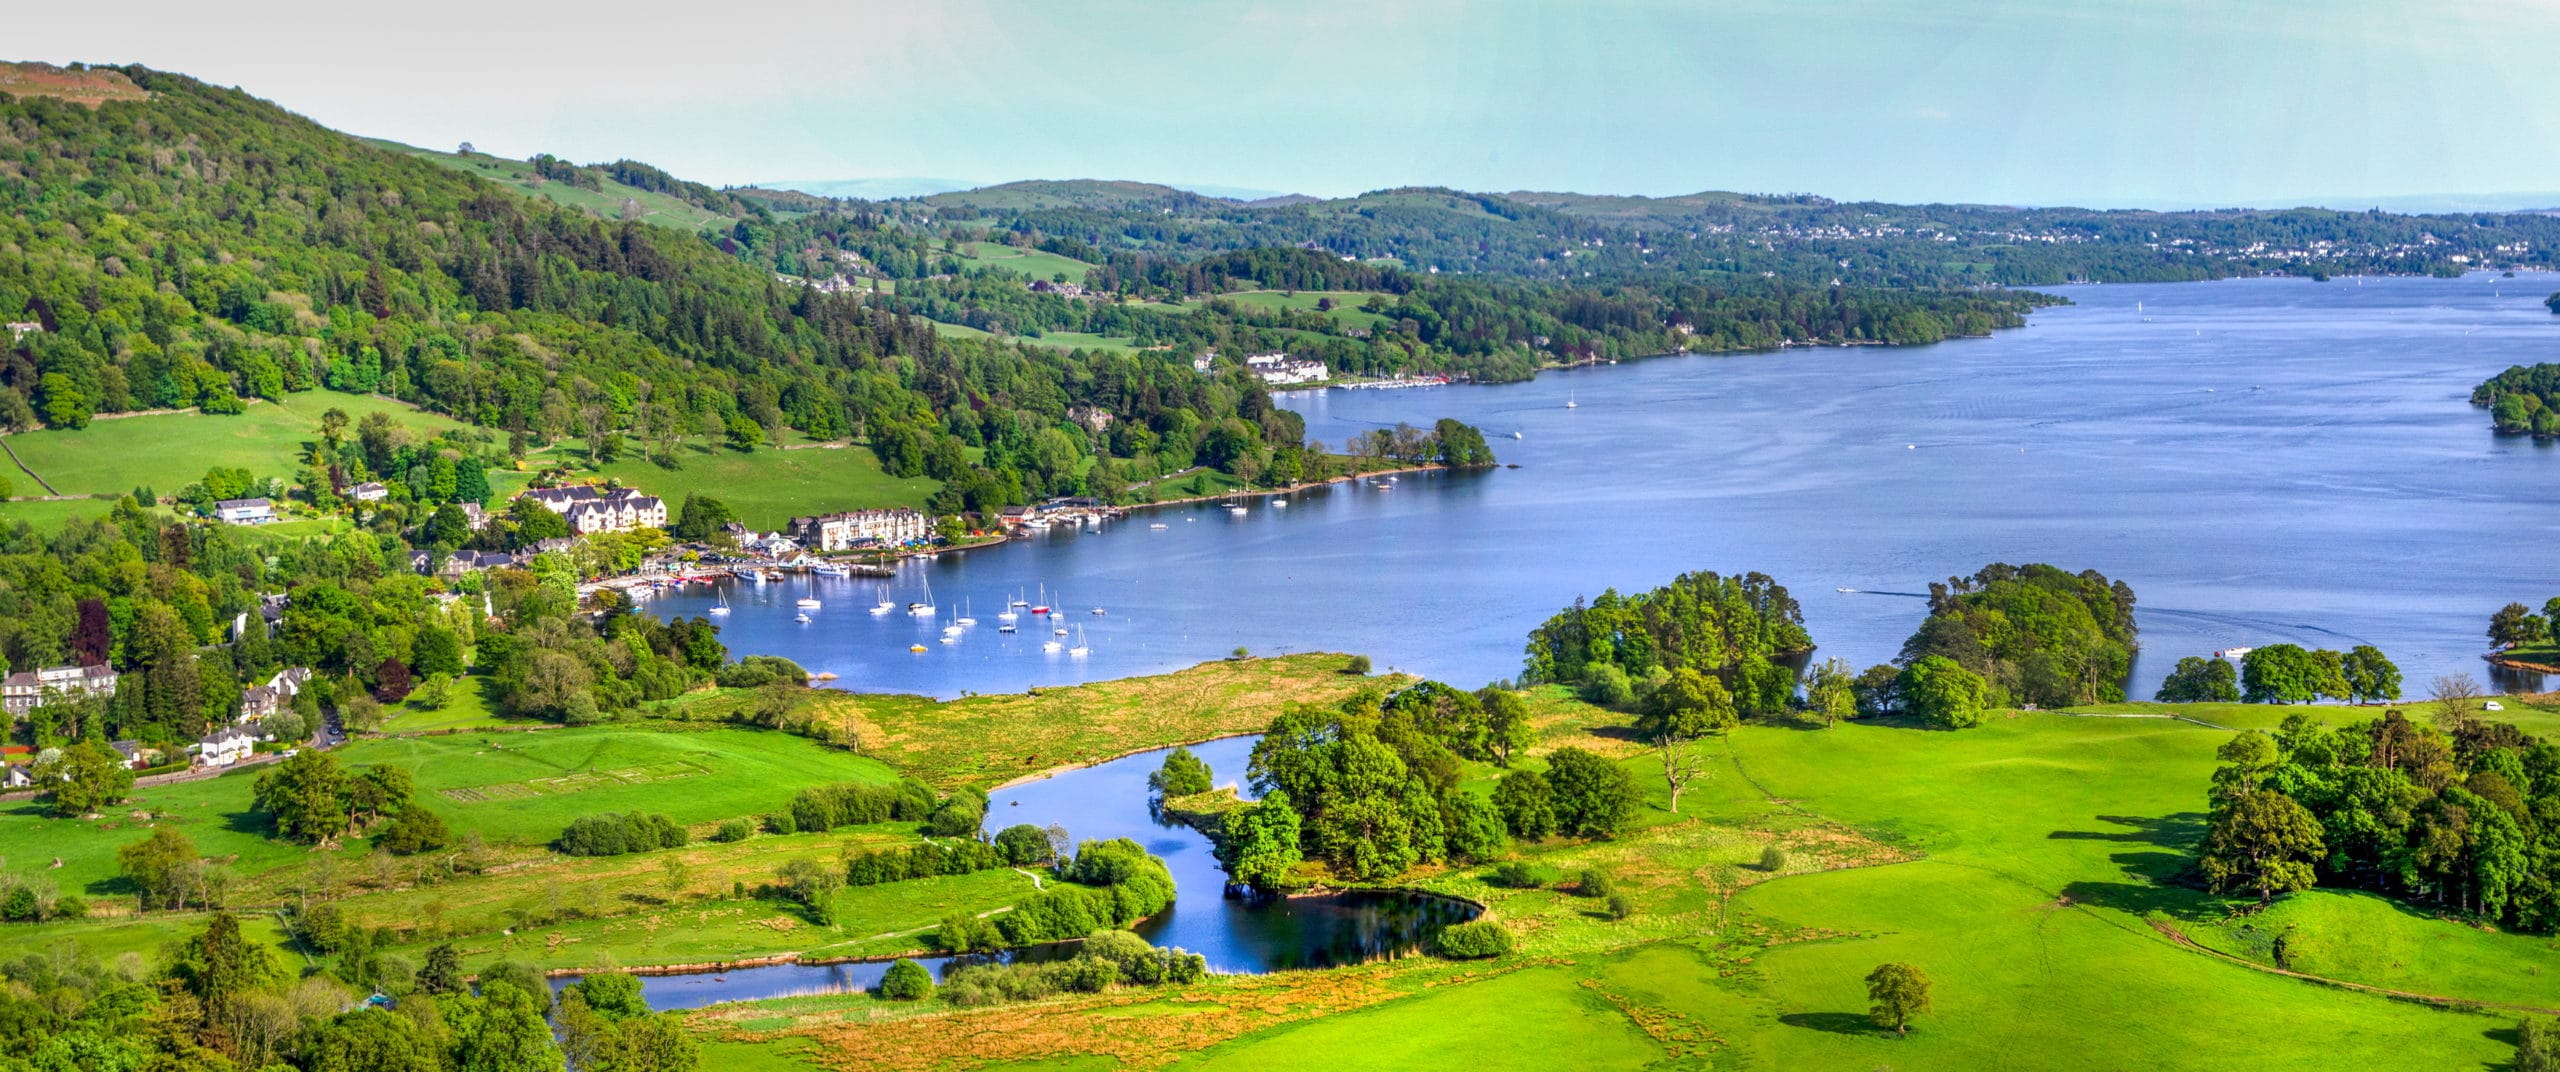 Luxury Country House Hotels in Windermere - Historic UK